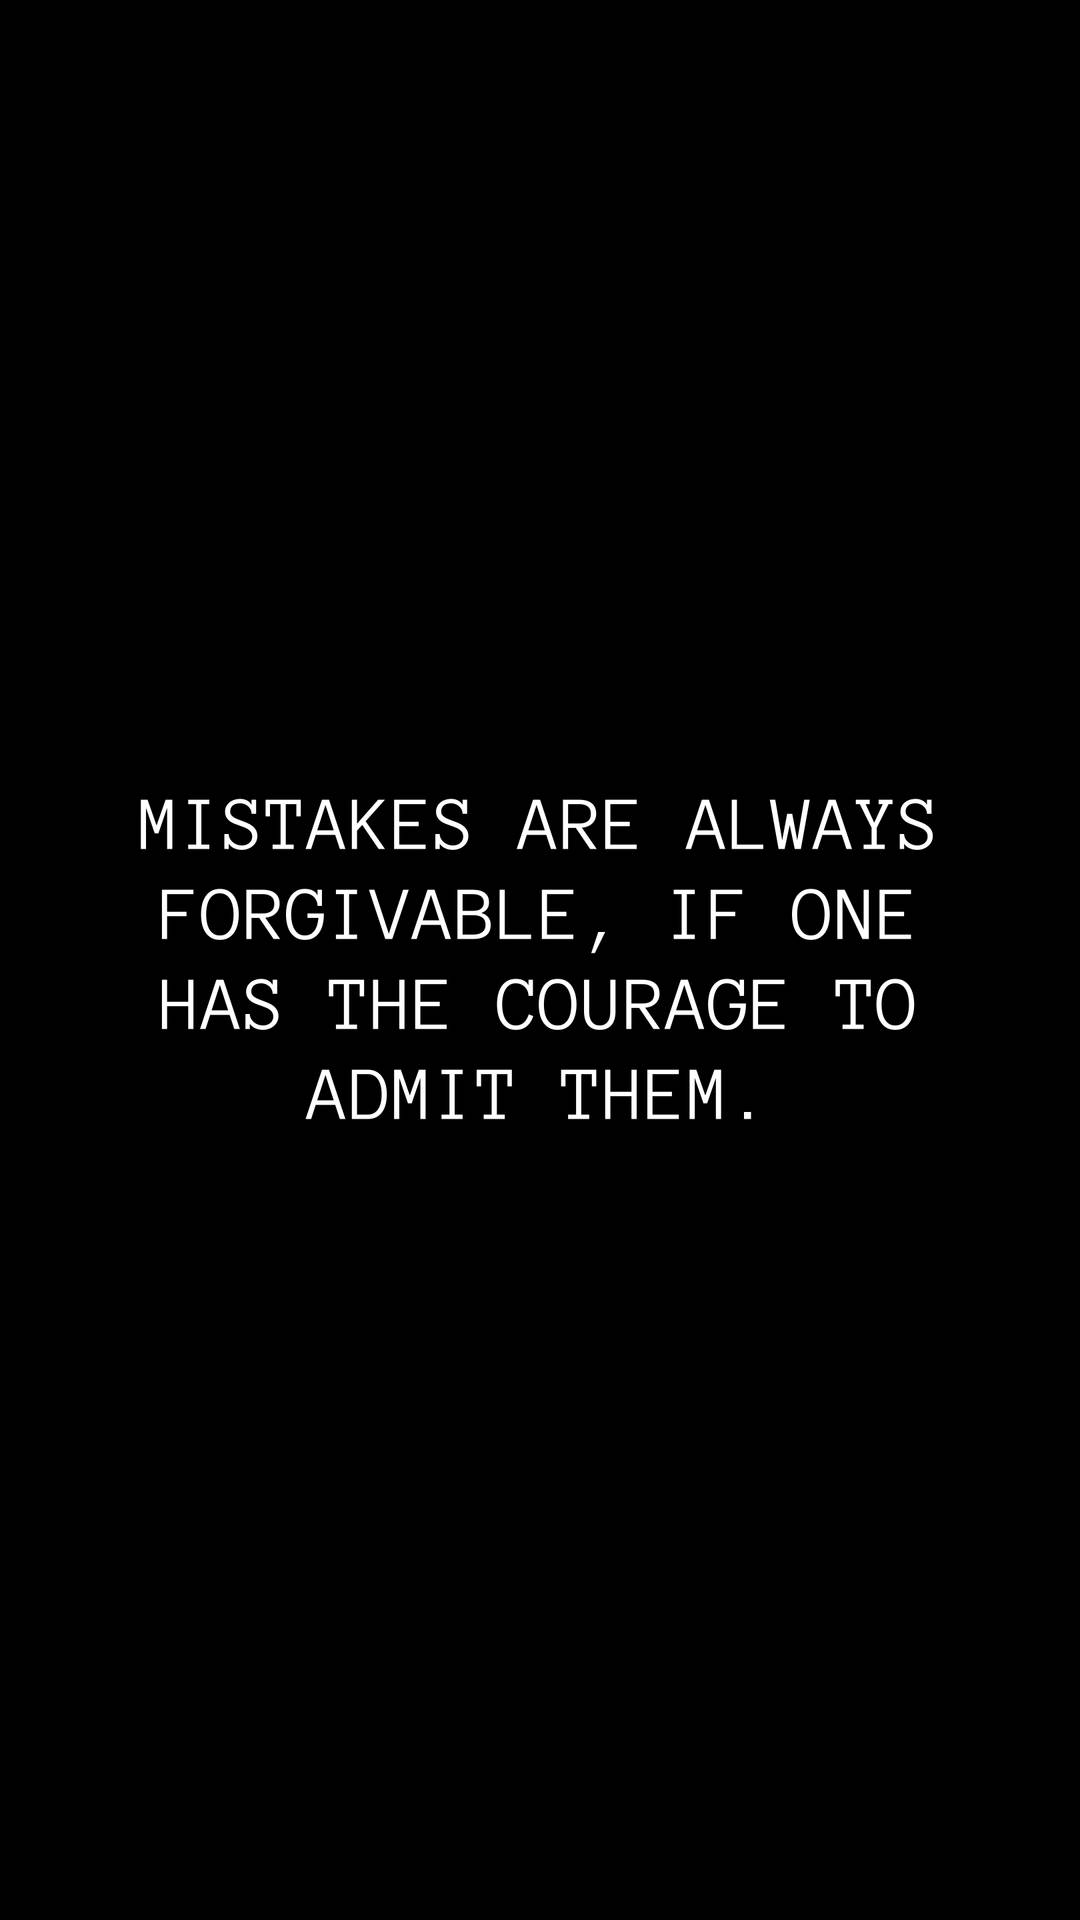 Mistakes And Courage Quotes Wallpaper